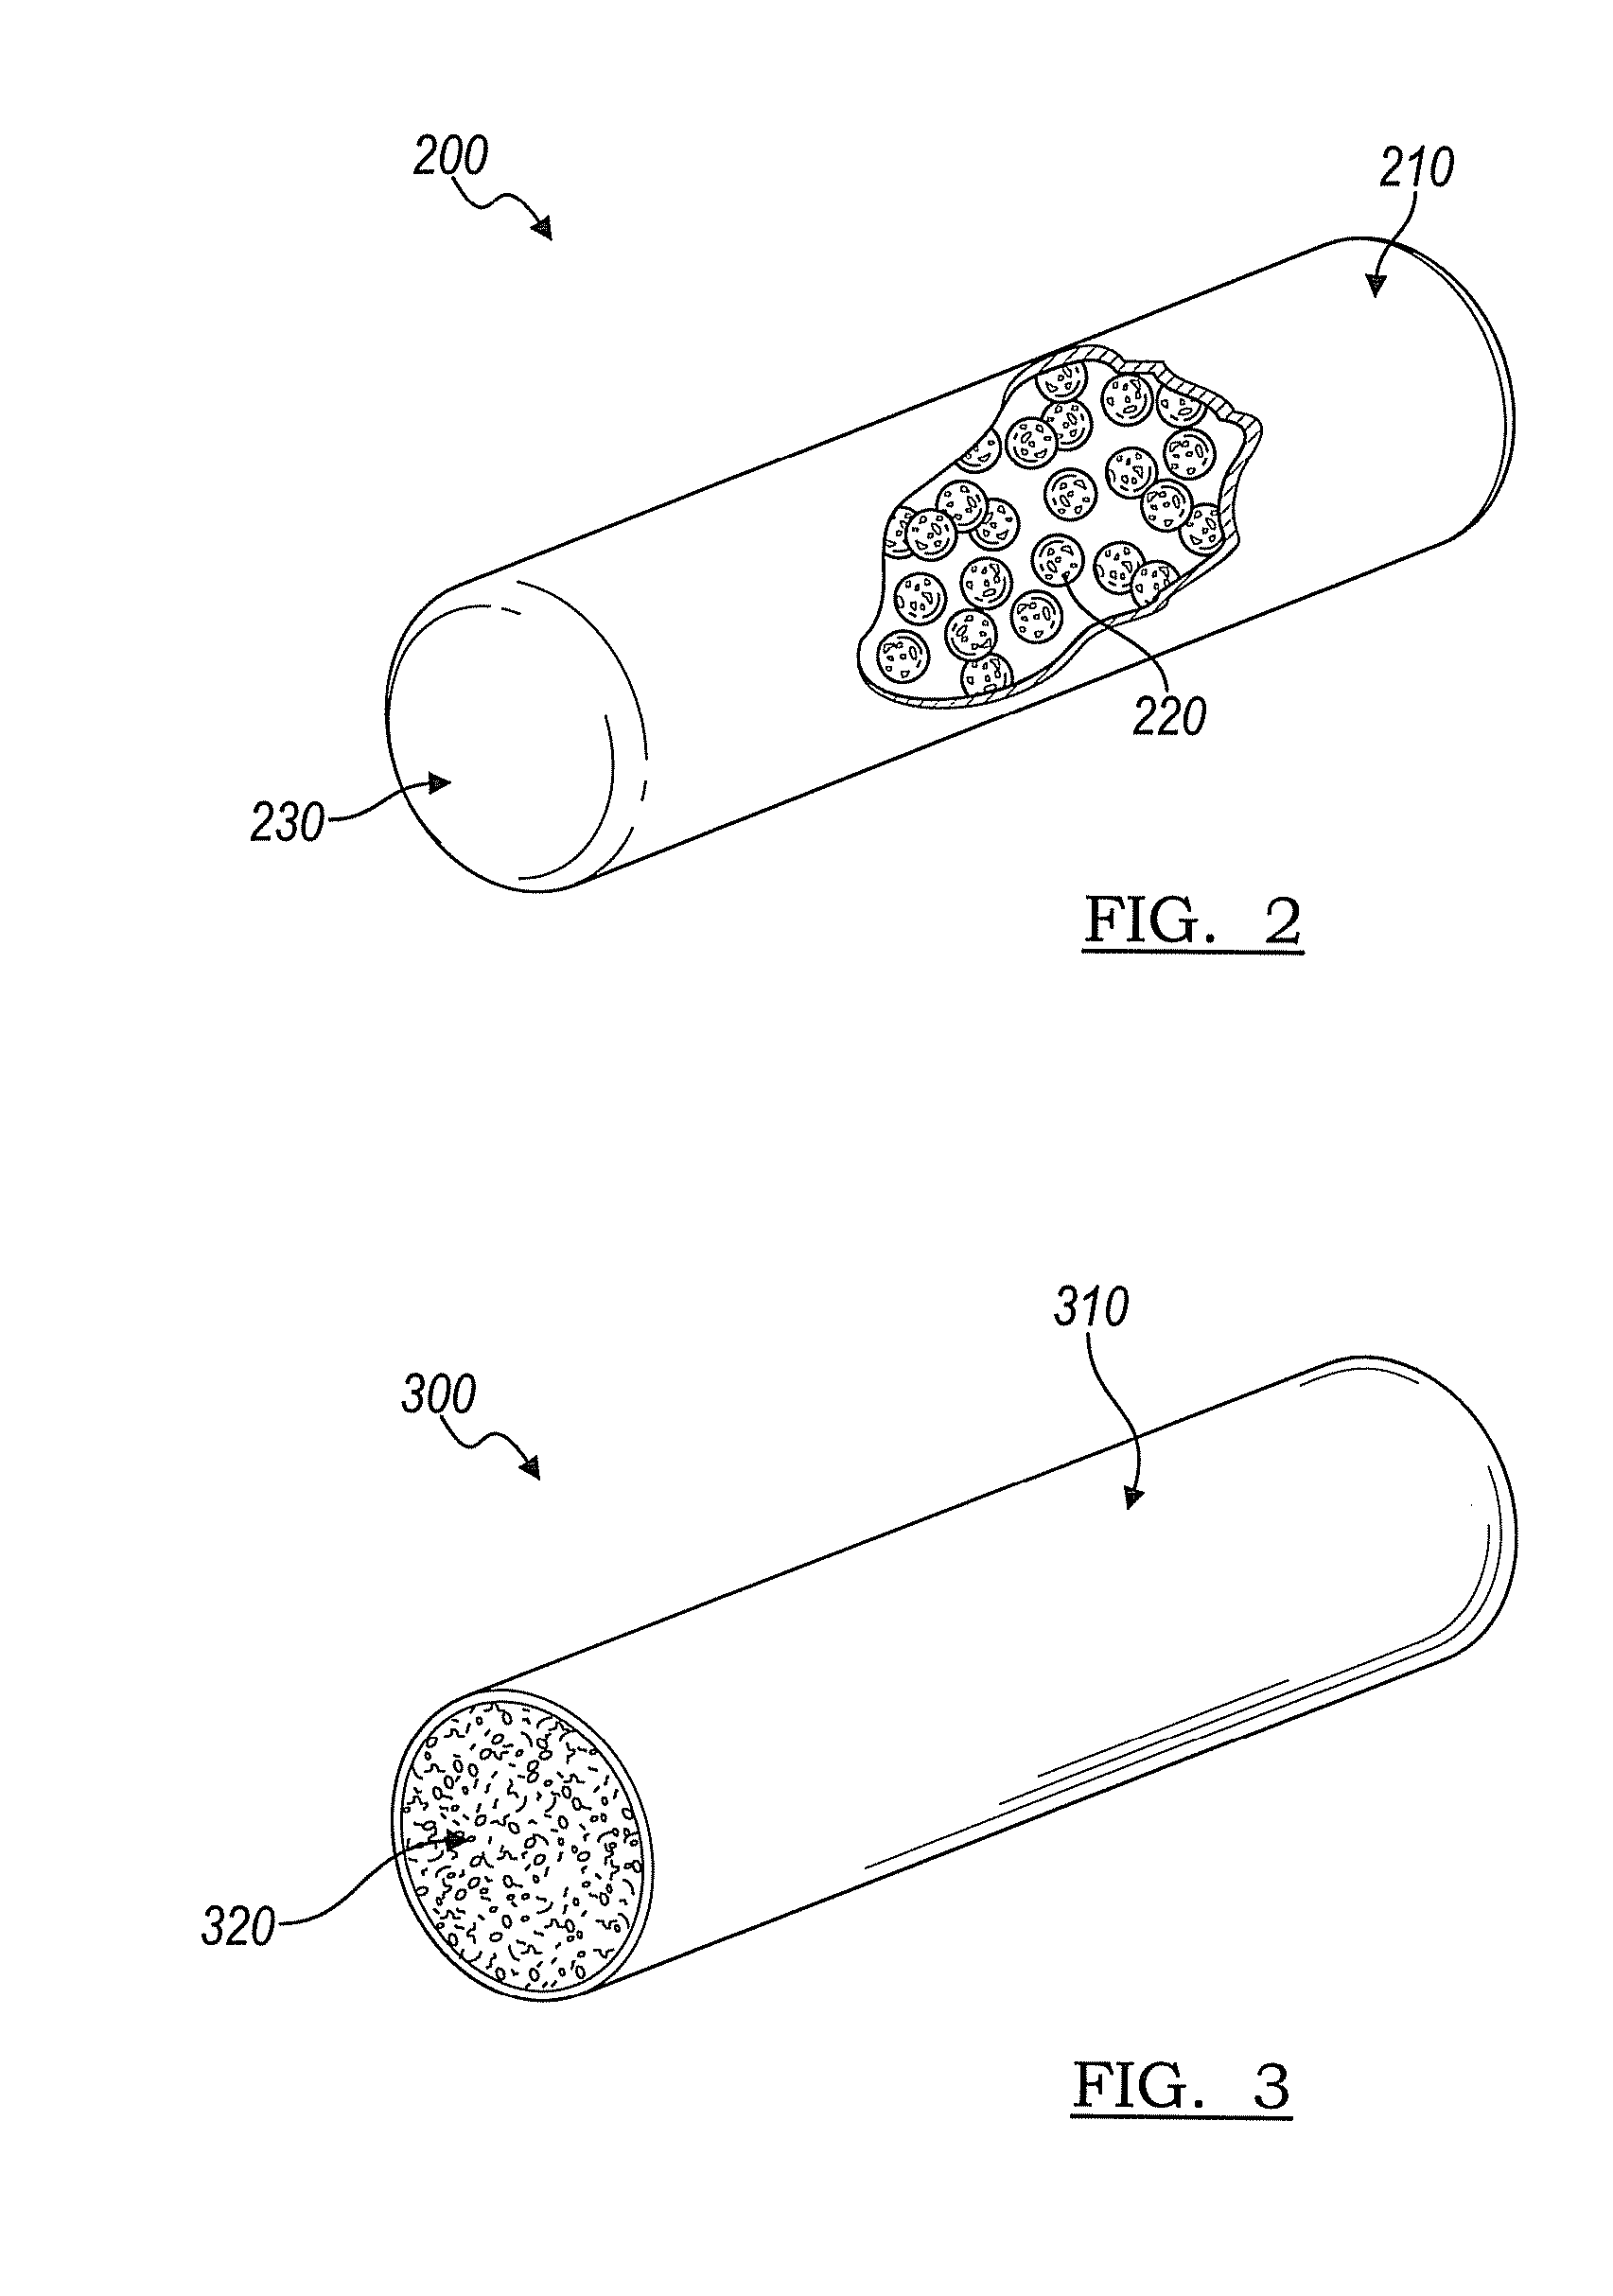 Implantable device for production of interleukin-1 receptor antagonist